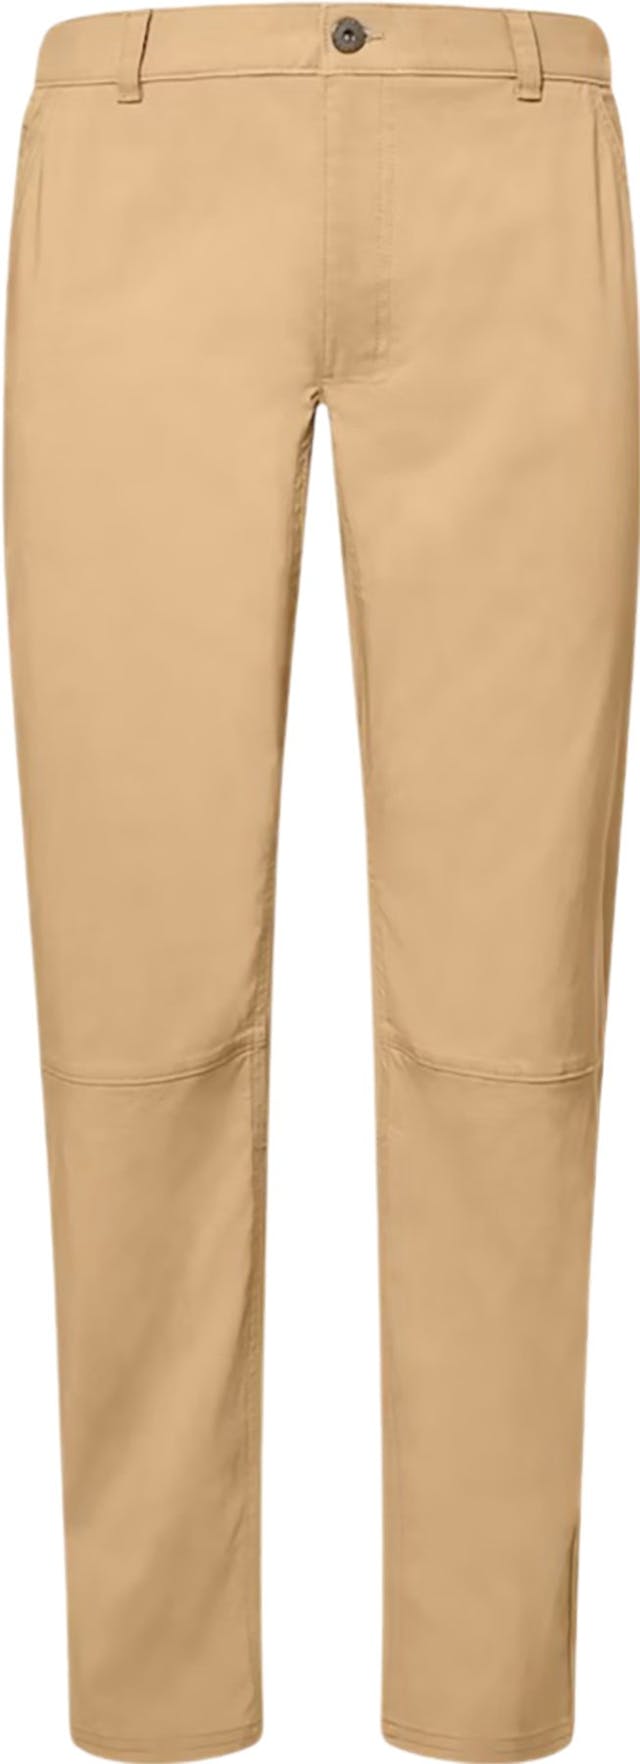 Product image for Perf 5 2.0 Utility Pant - Men's